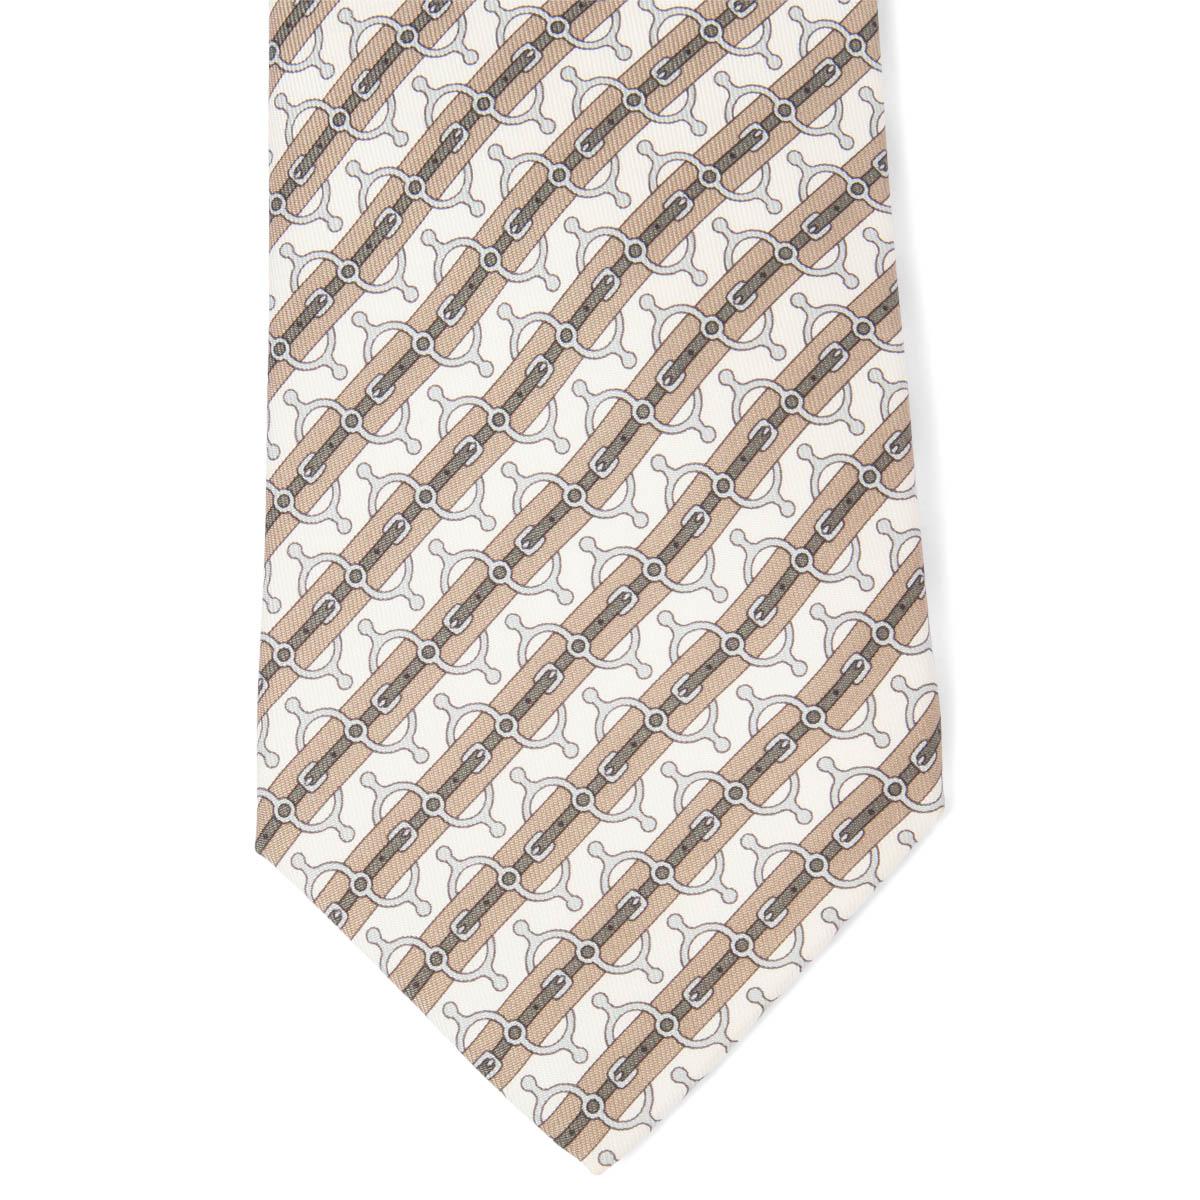 100% authentic Hermes Stir-Up Striped ties in sage ivory, taupe and Gray silk twill (100%). Has been worn and is in excellent condition. No Box.

Measurements
Model	5644
Length	156cm (60.8in)
Widest Point	9cm (3.54in)

All our listings include only